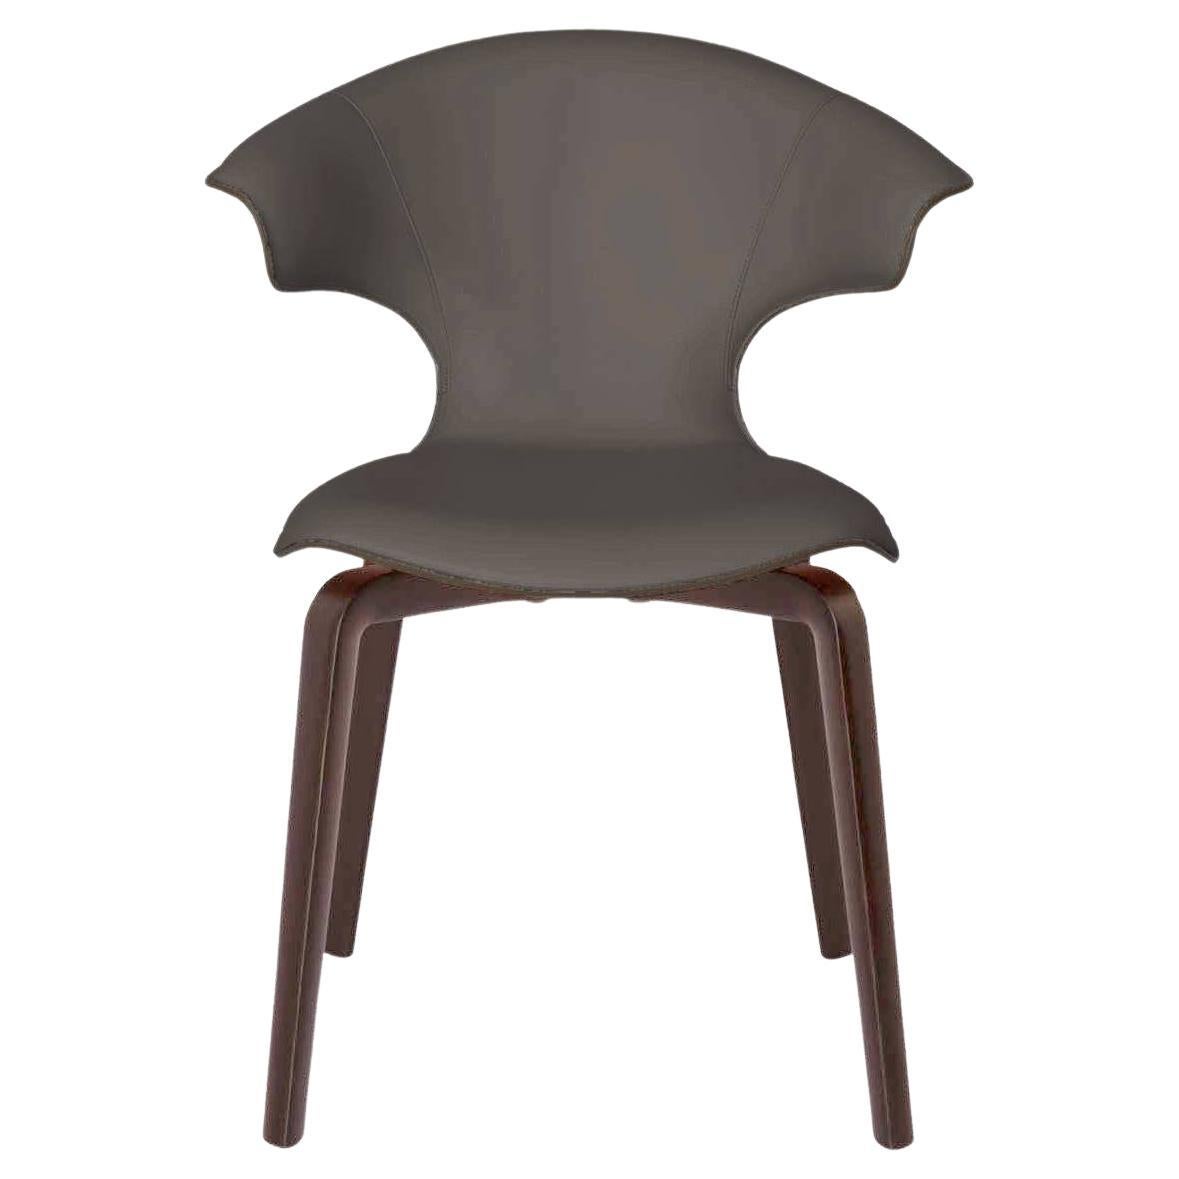 Montera Chair with Arms in Genuine Leather Pelle SC 28 Seppia Dark Grey For Sale